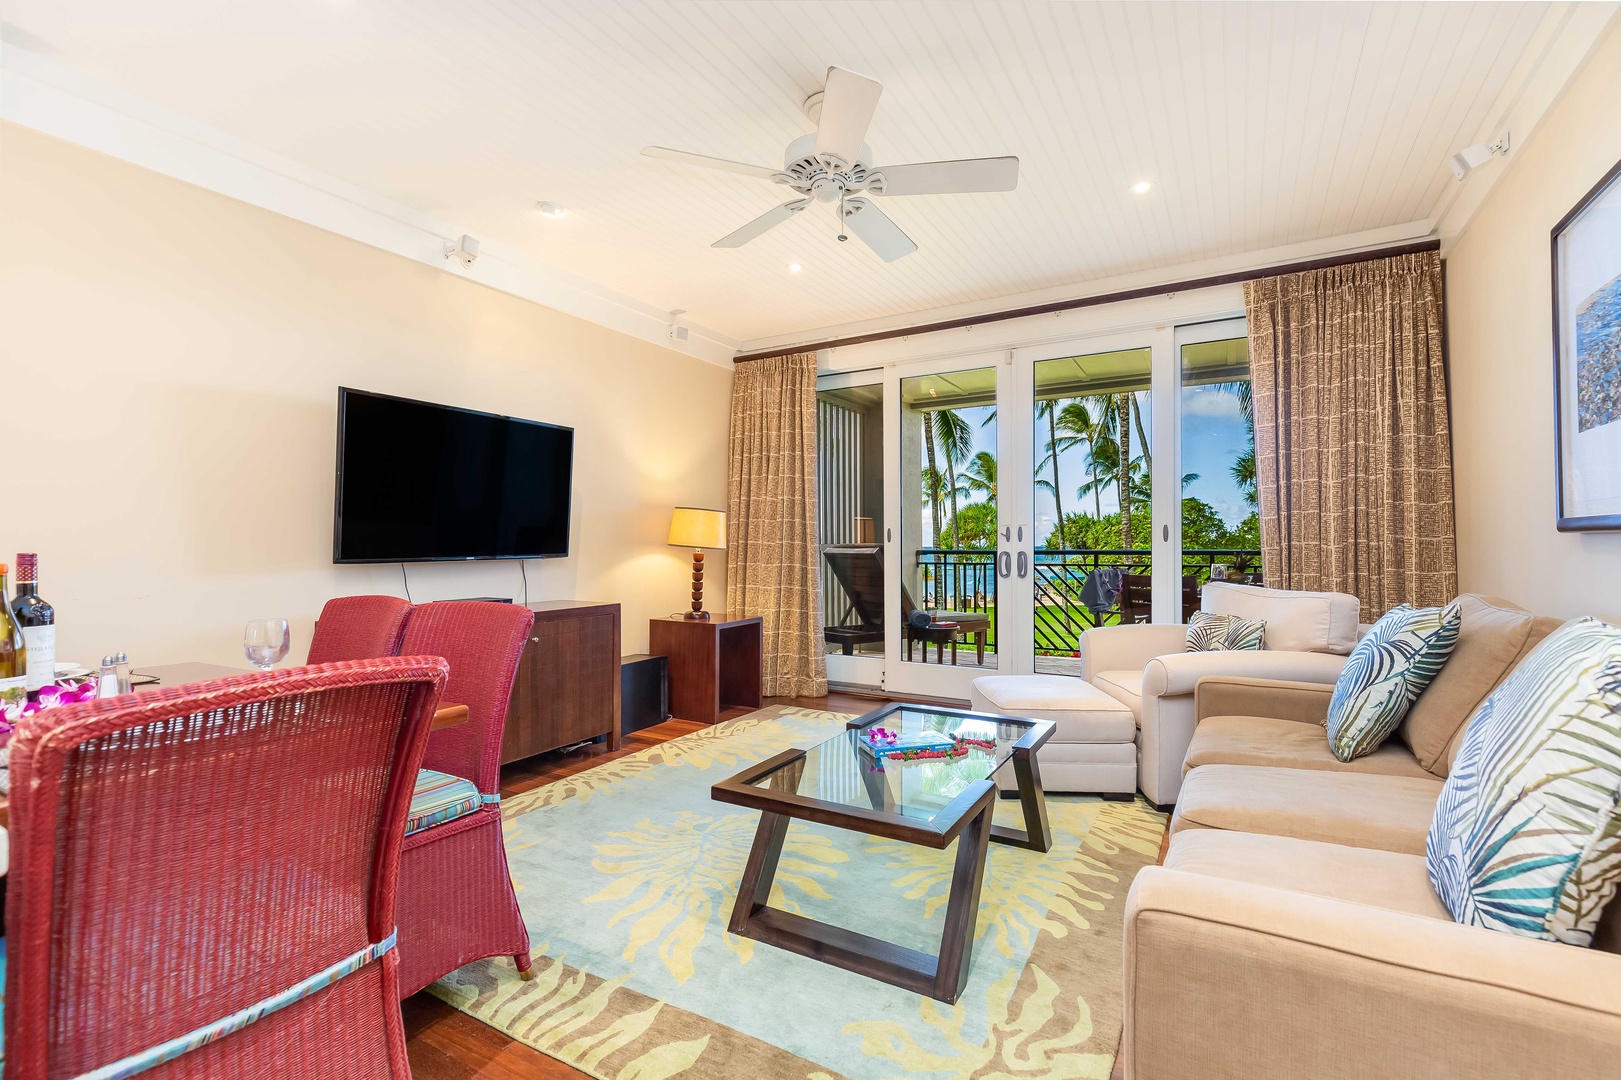 Kahuku Vacation Rentals, Turtle Bay Villas 205 - We make your stay just as enjoyable an experience as you can imagine